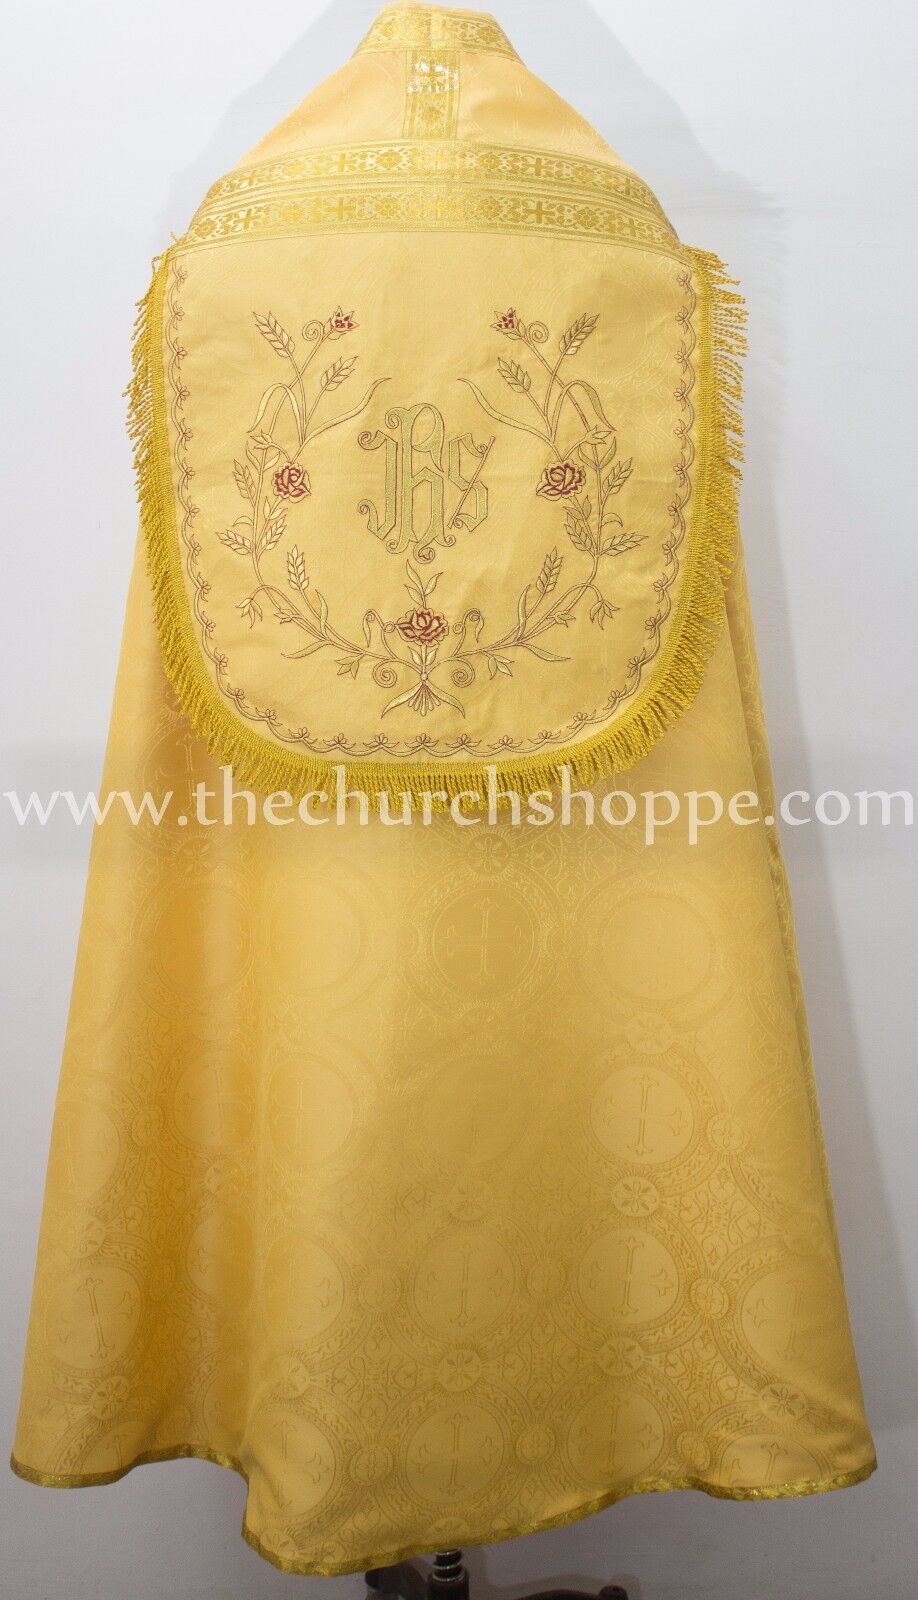 New Yellow Cope & Stole Set with IHS embroidery,capa pluvial,chape,far fronte